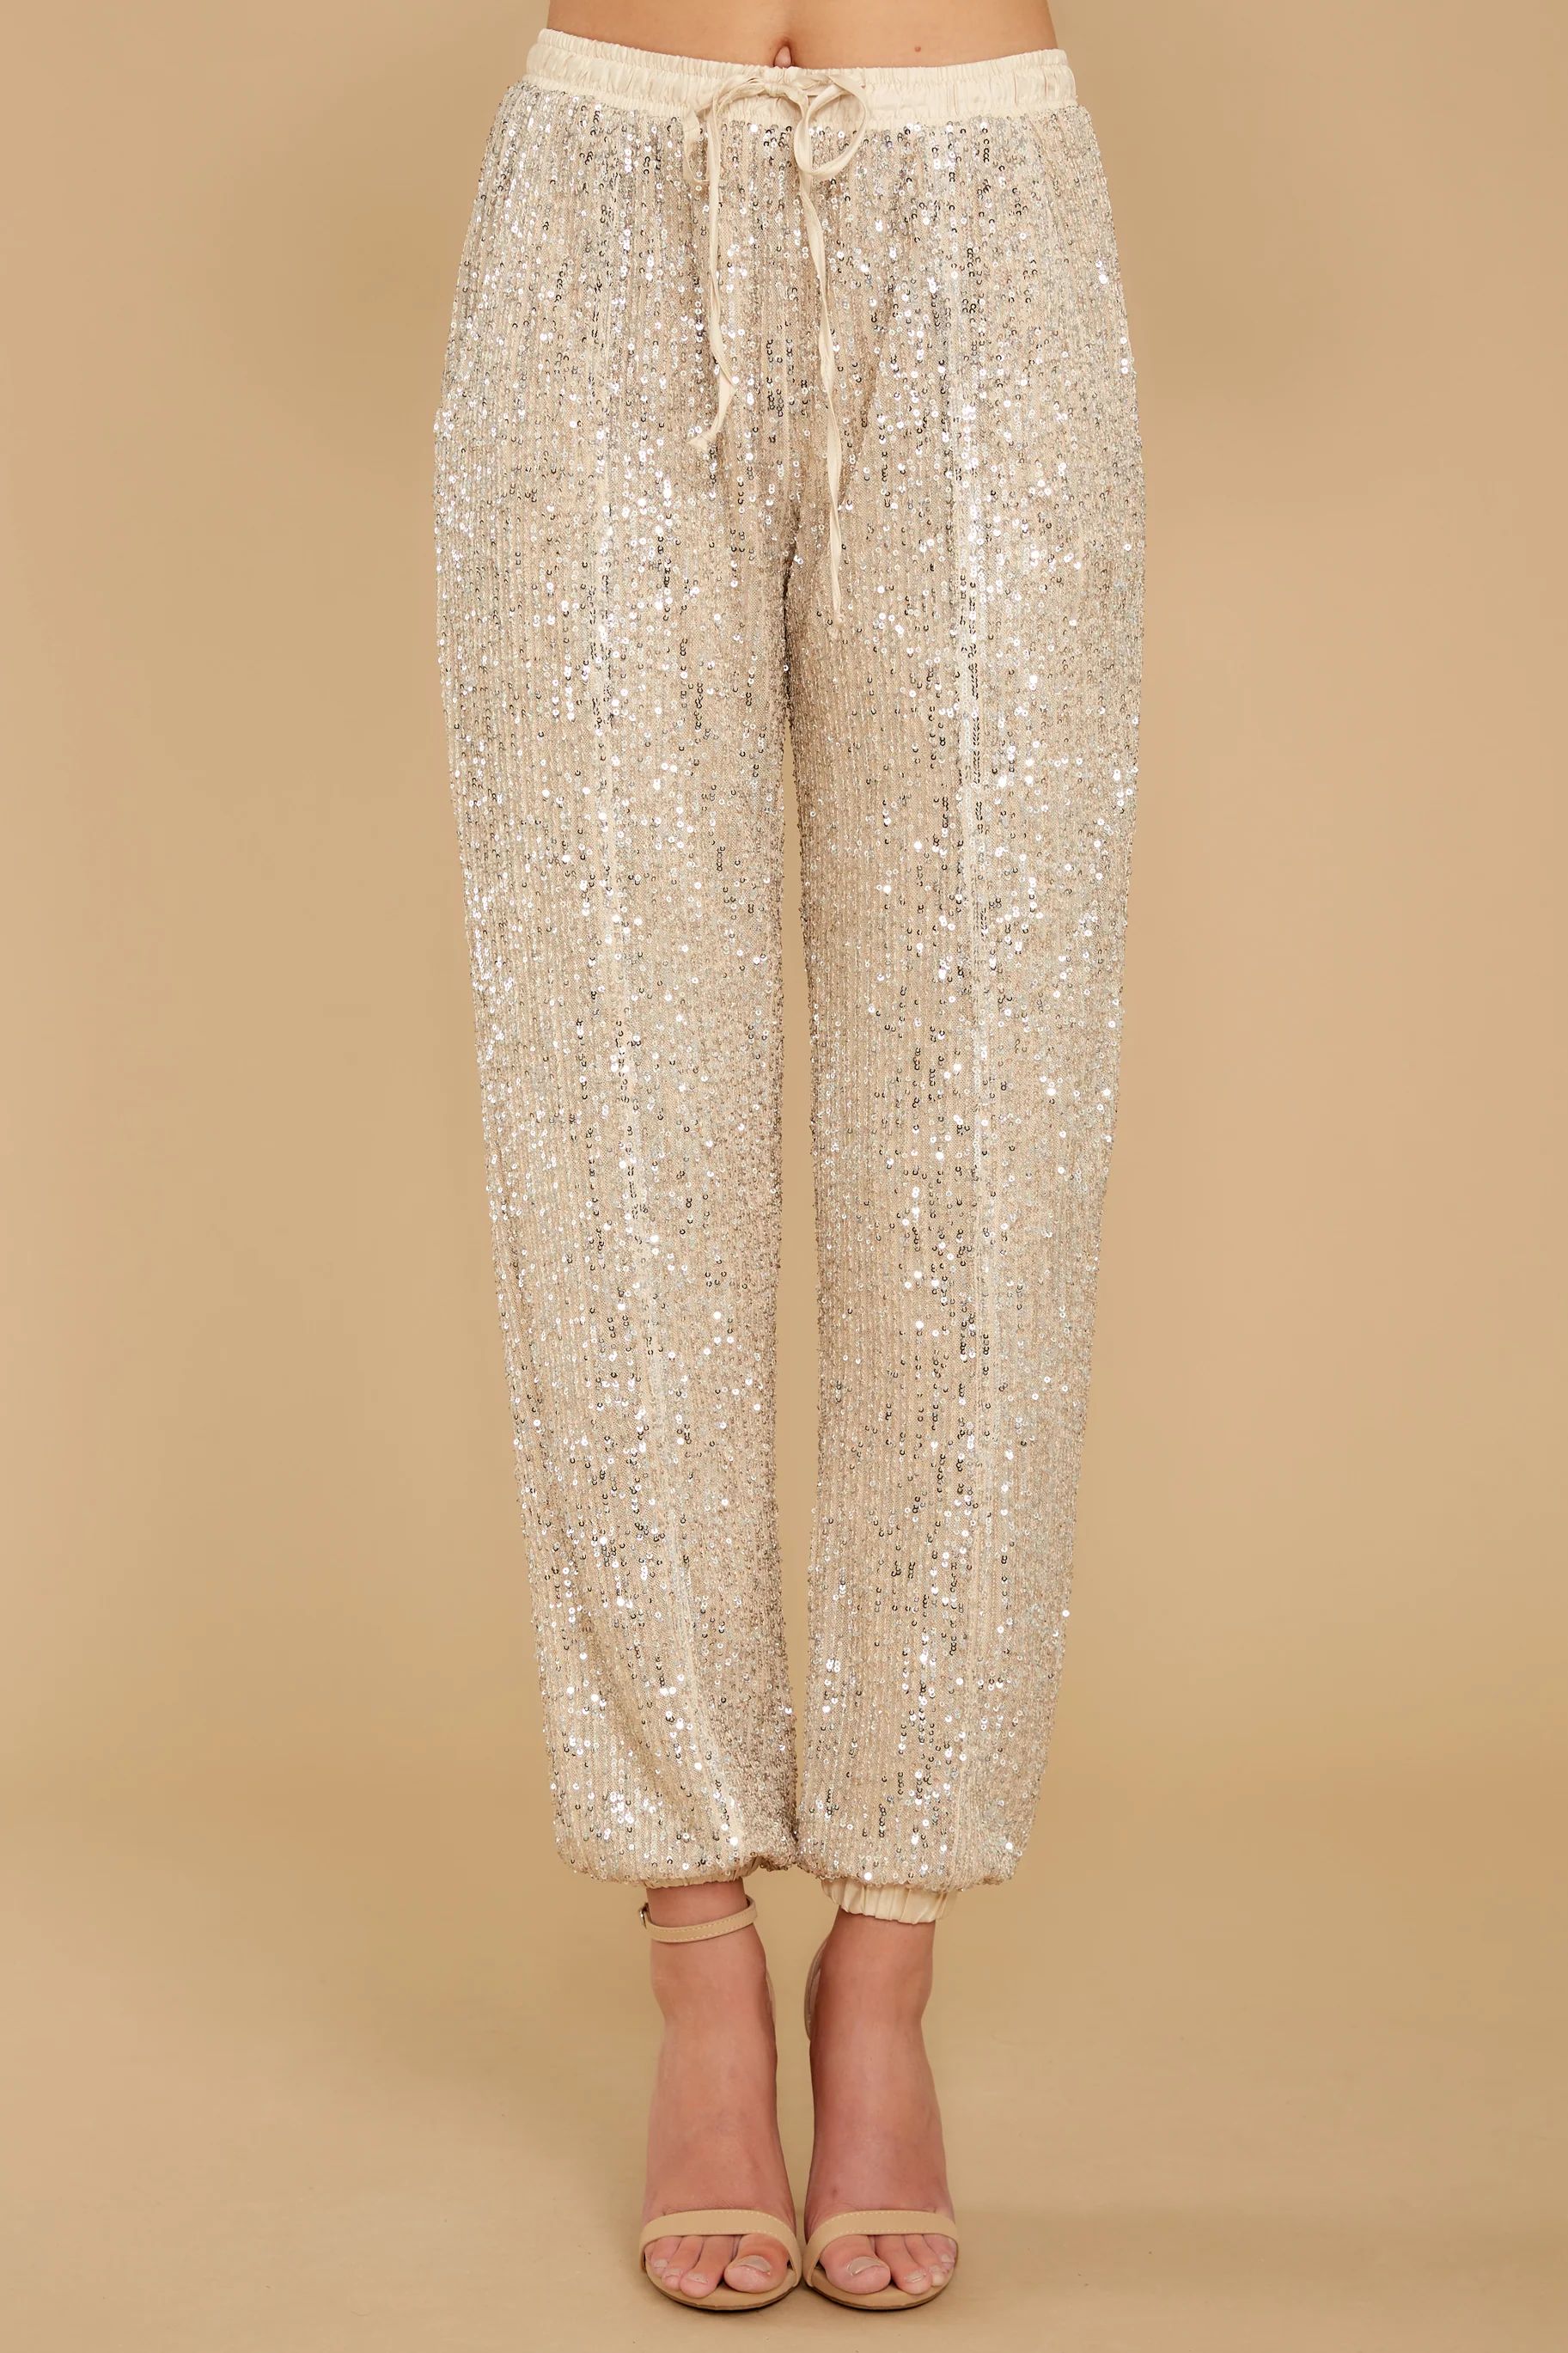 More Than A Fever Champagne Sequin Pants | Red Dress 